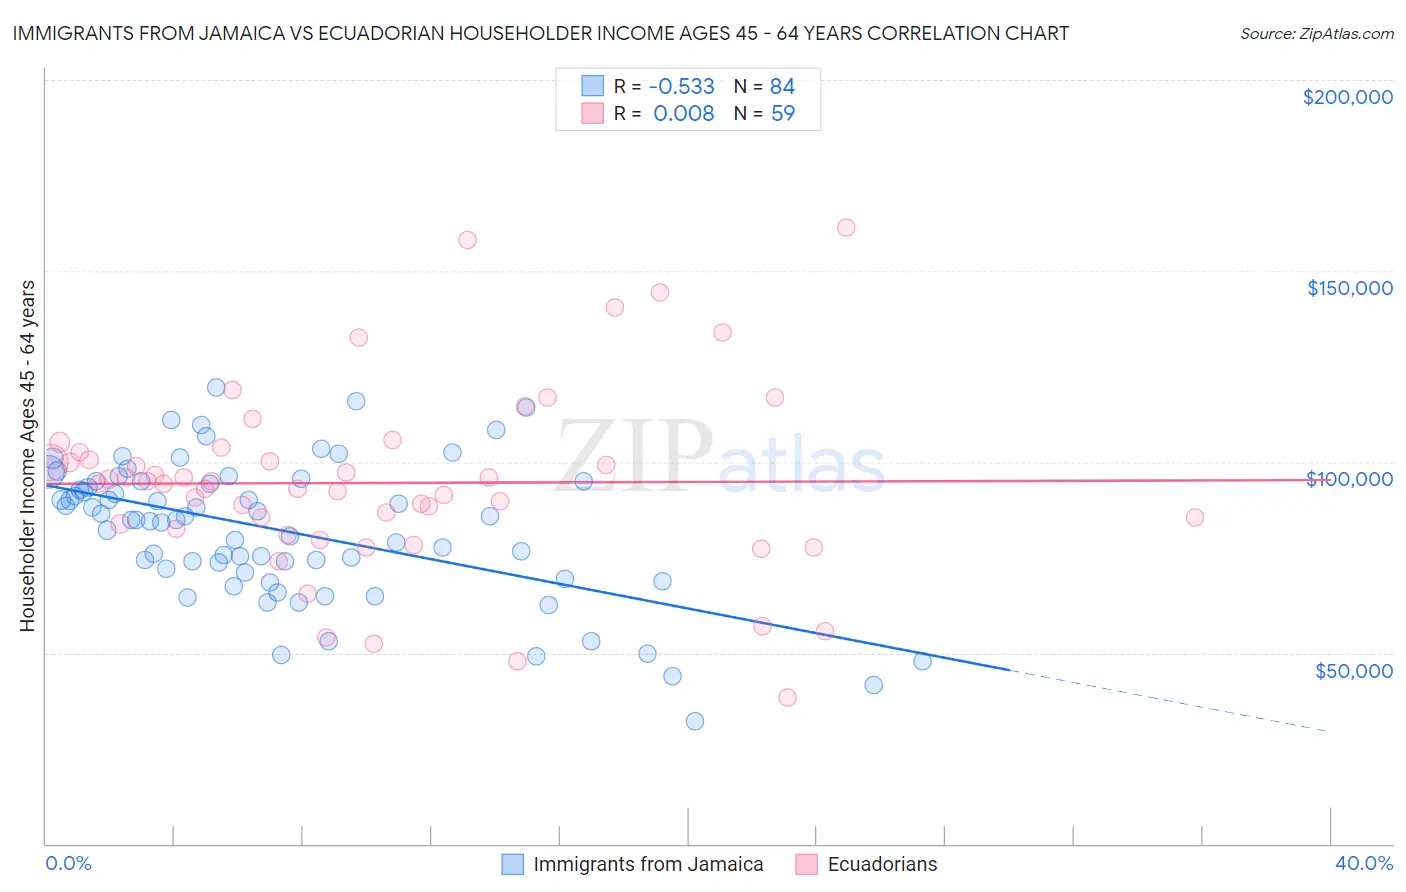 Immigrants from Jamaica vs Ecuadorian Householder Income Ages 45 - 64 years